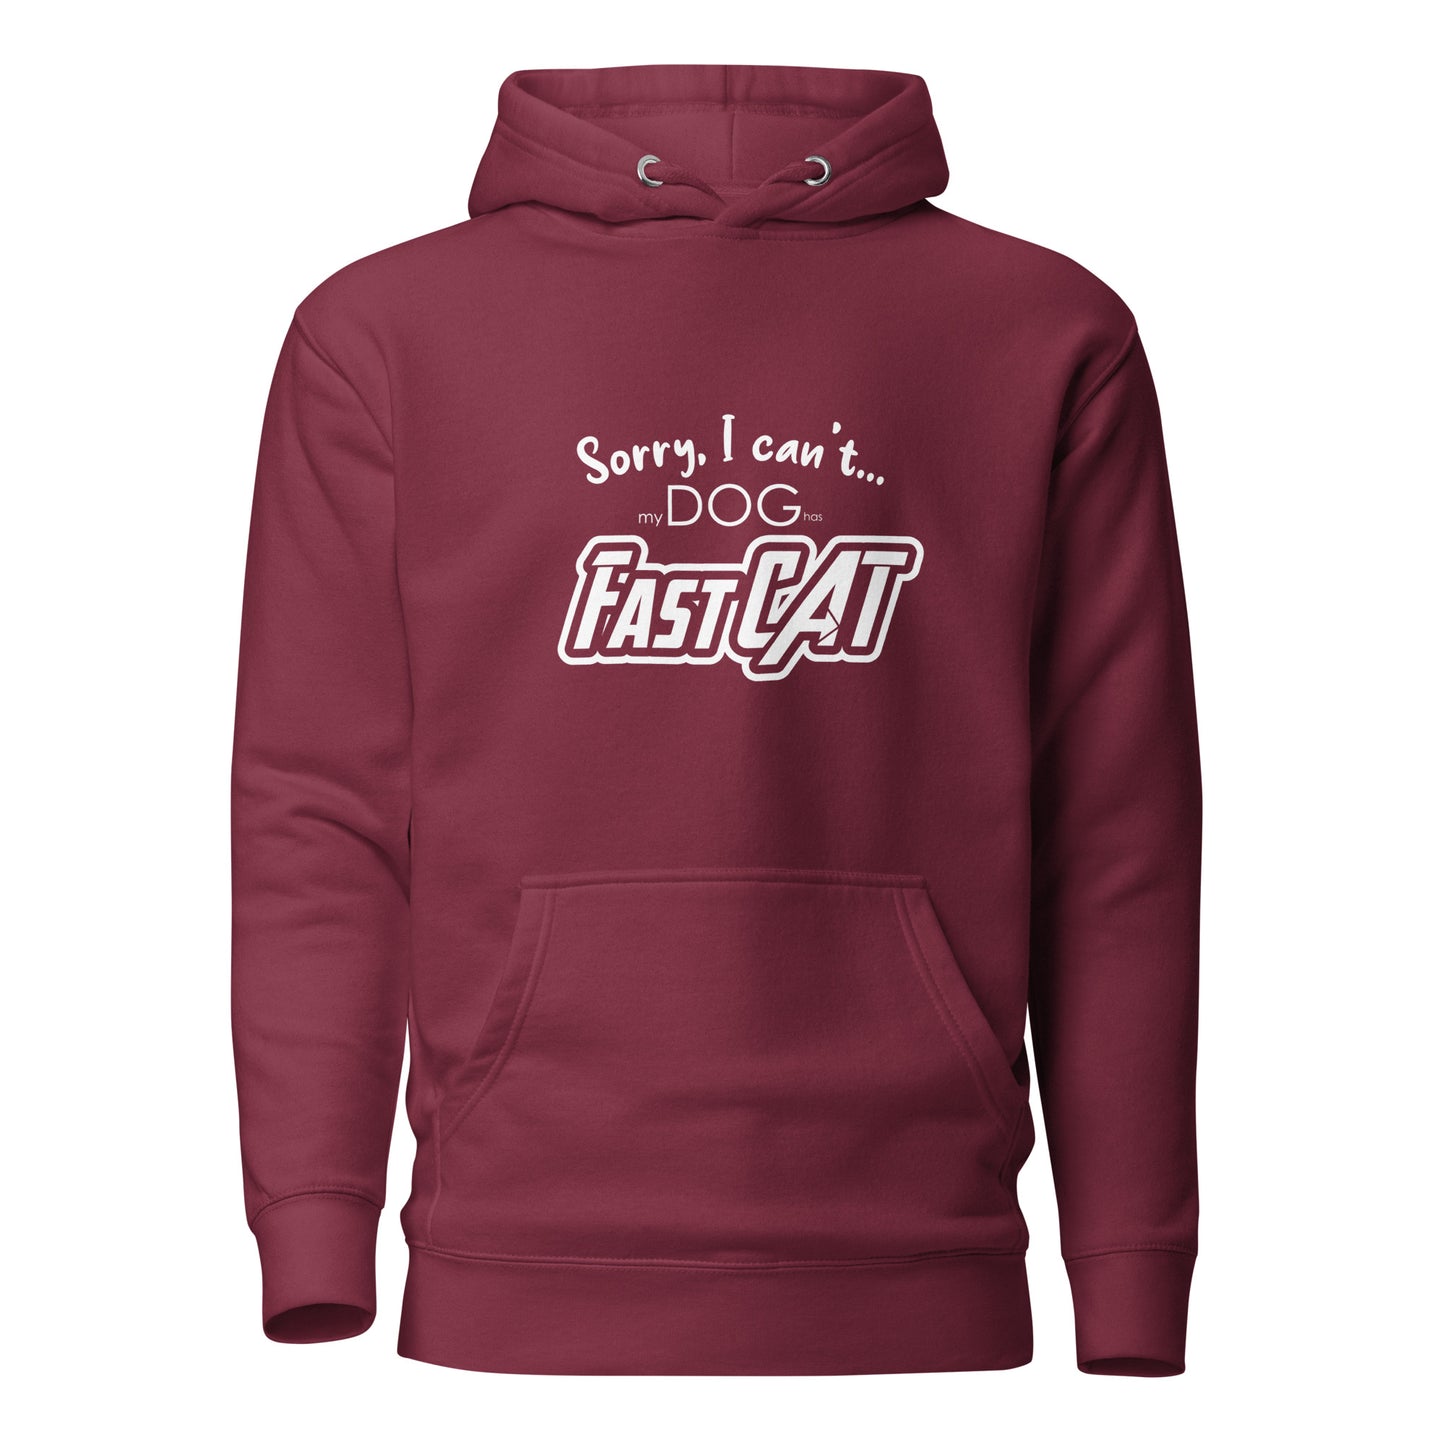 SORRY I CANT - FAST CAT - Unisex Hoodie